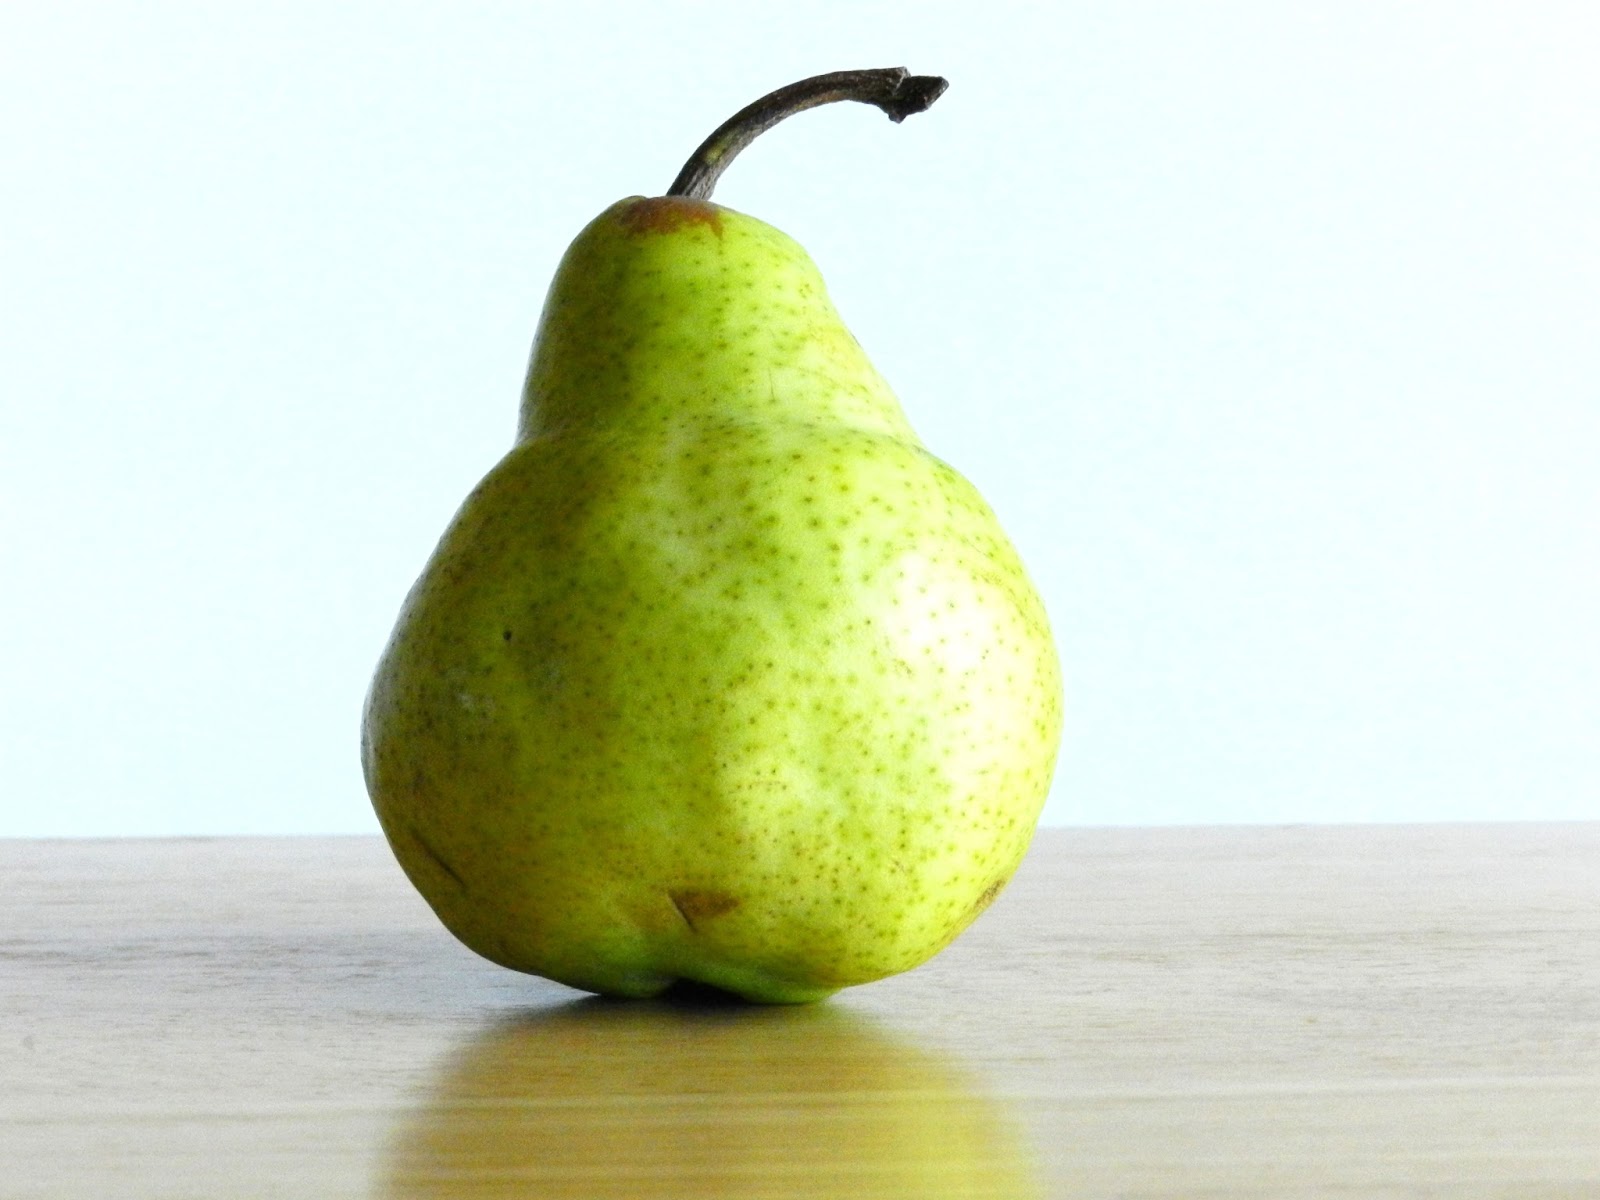 Step 1: Looking at an actual pear, or a pear picture, draw a light outline ...